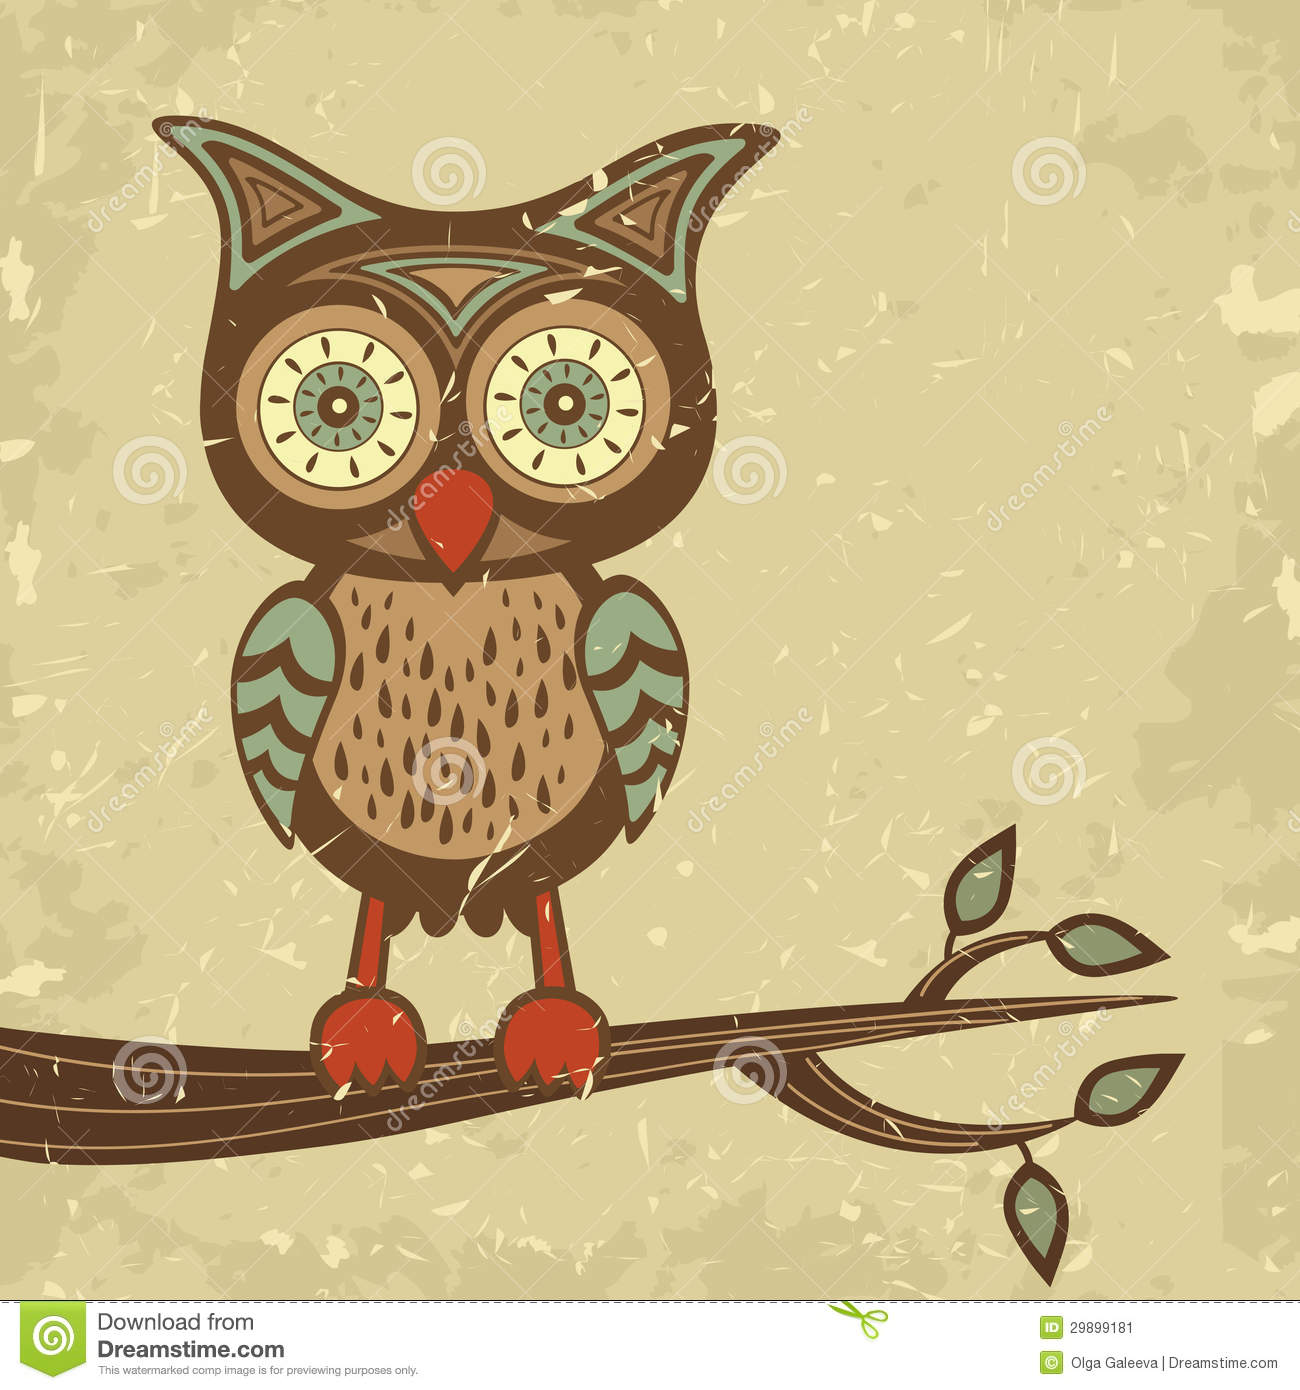 Cute Retro Style Owl Sitting On Branch Stock Image   Image  29899181